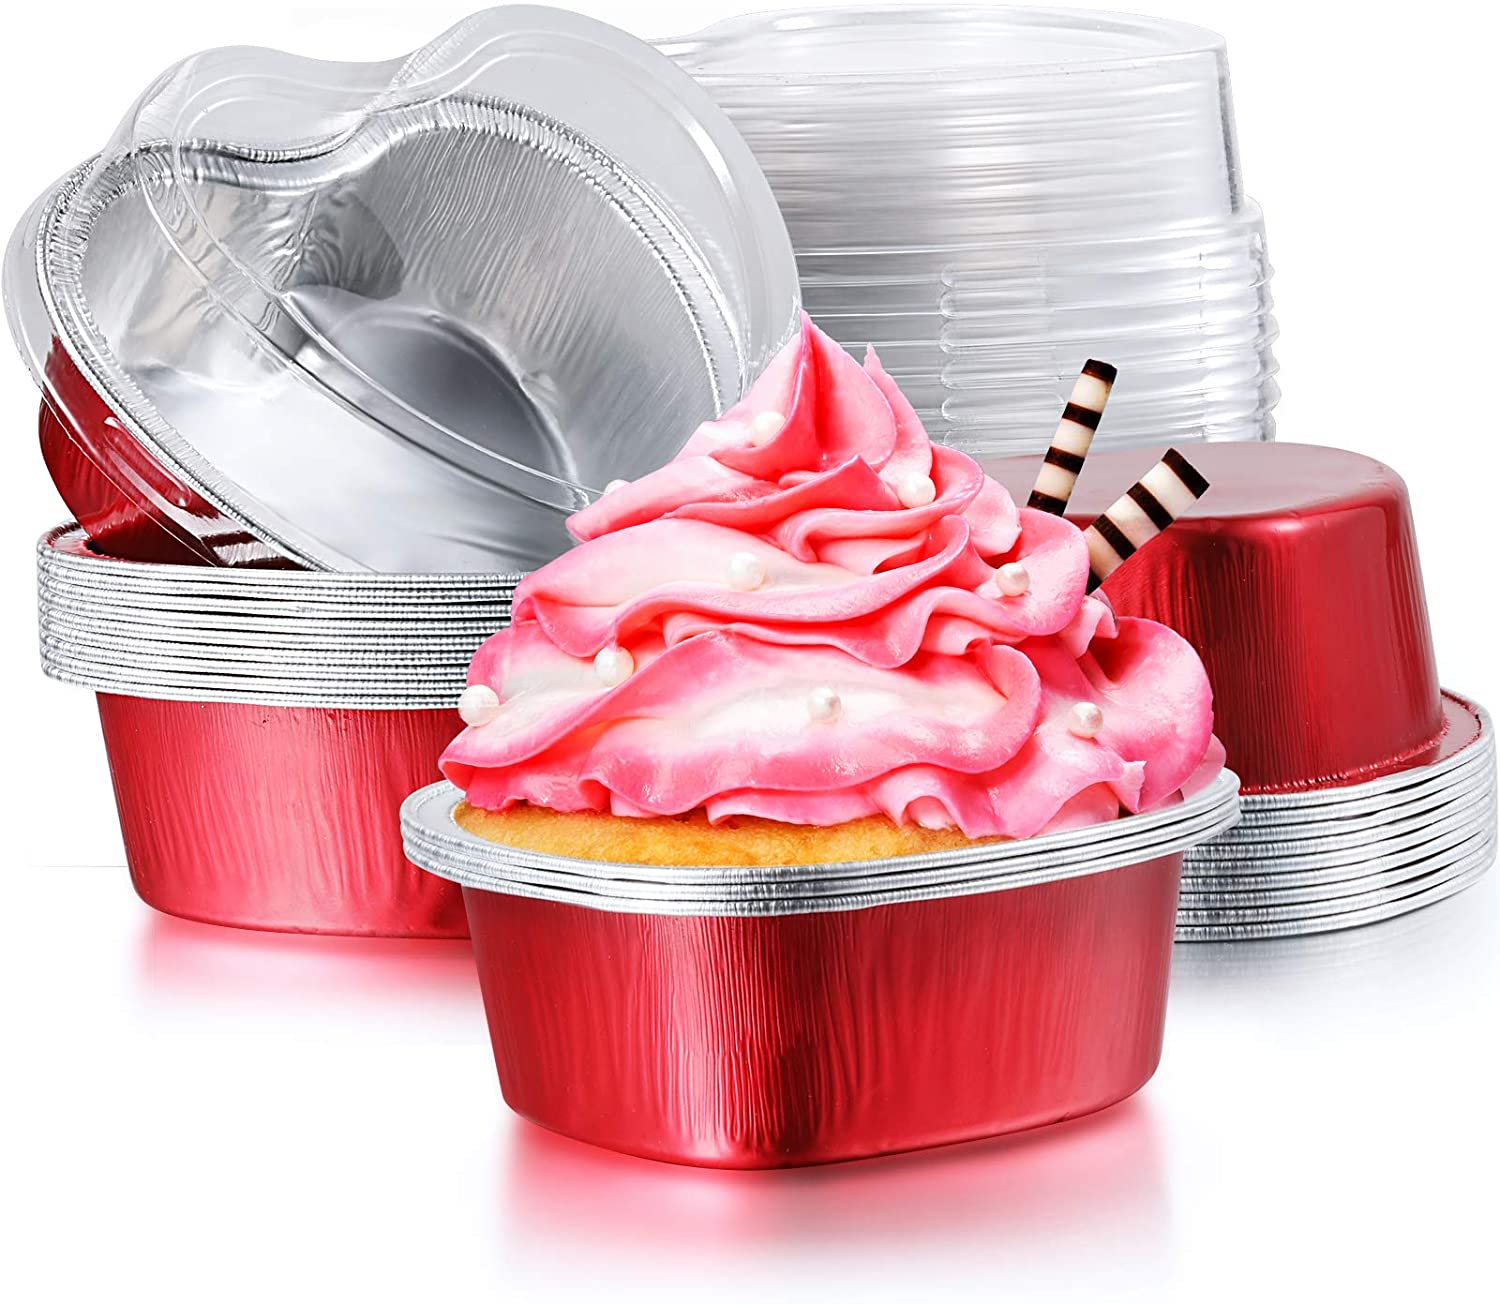 Aluminum Foil Cake Pan Heart Shaped Cupcake Cup with Lids 100 ml/ 3.4 Ounces Disposable Mini Cupcake Cup Flan Baking Cups for Va: red